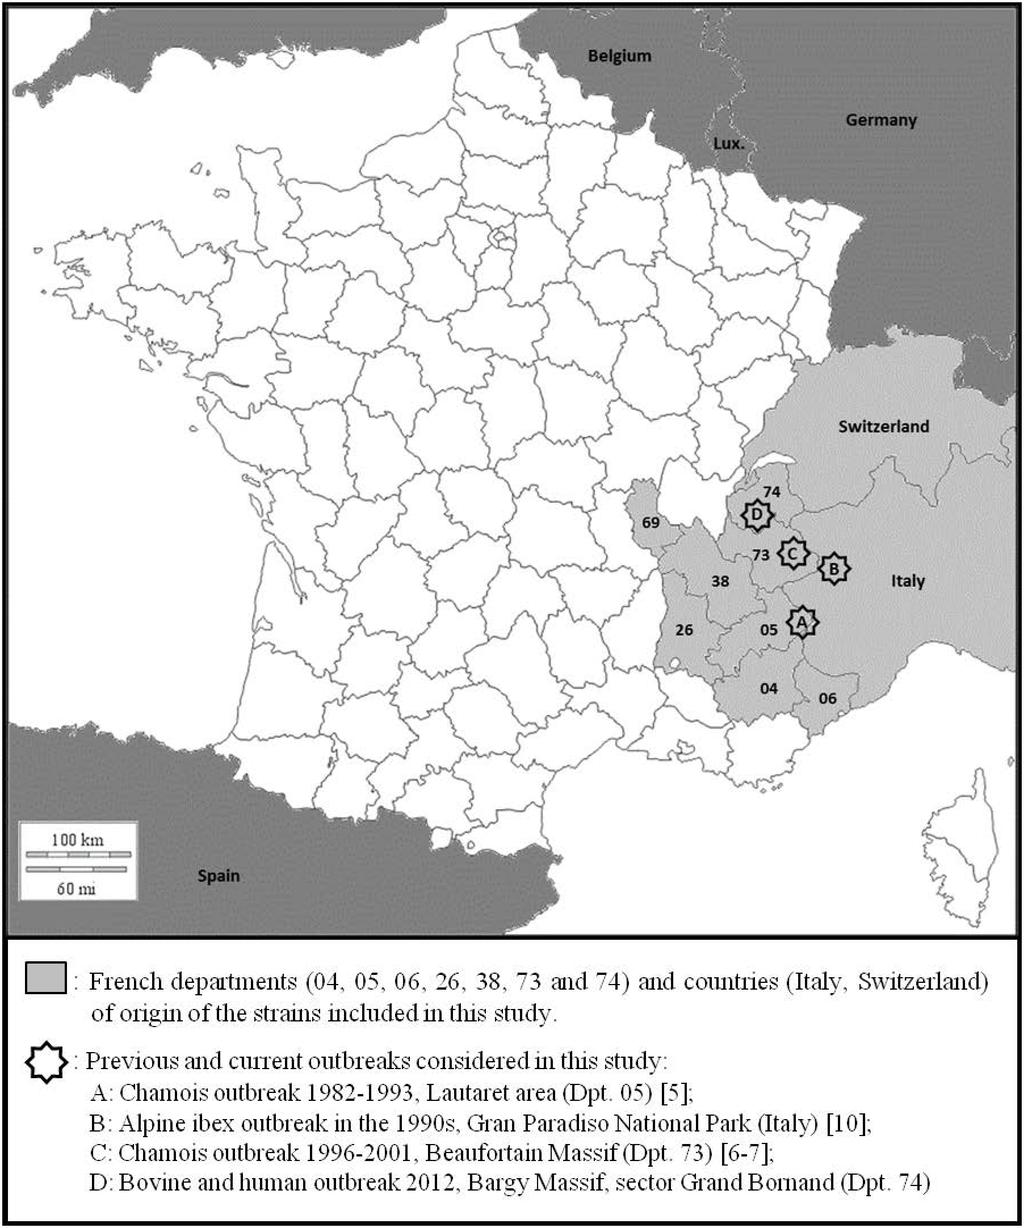 Figure 1. Survey area with current and previous Brucella melitensis bv 3 outbreaks in wild ungulates in the Alps. doi:10.1371/journal.pone.0094168.